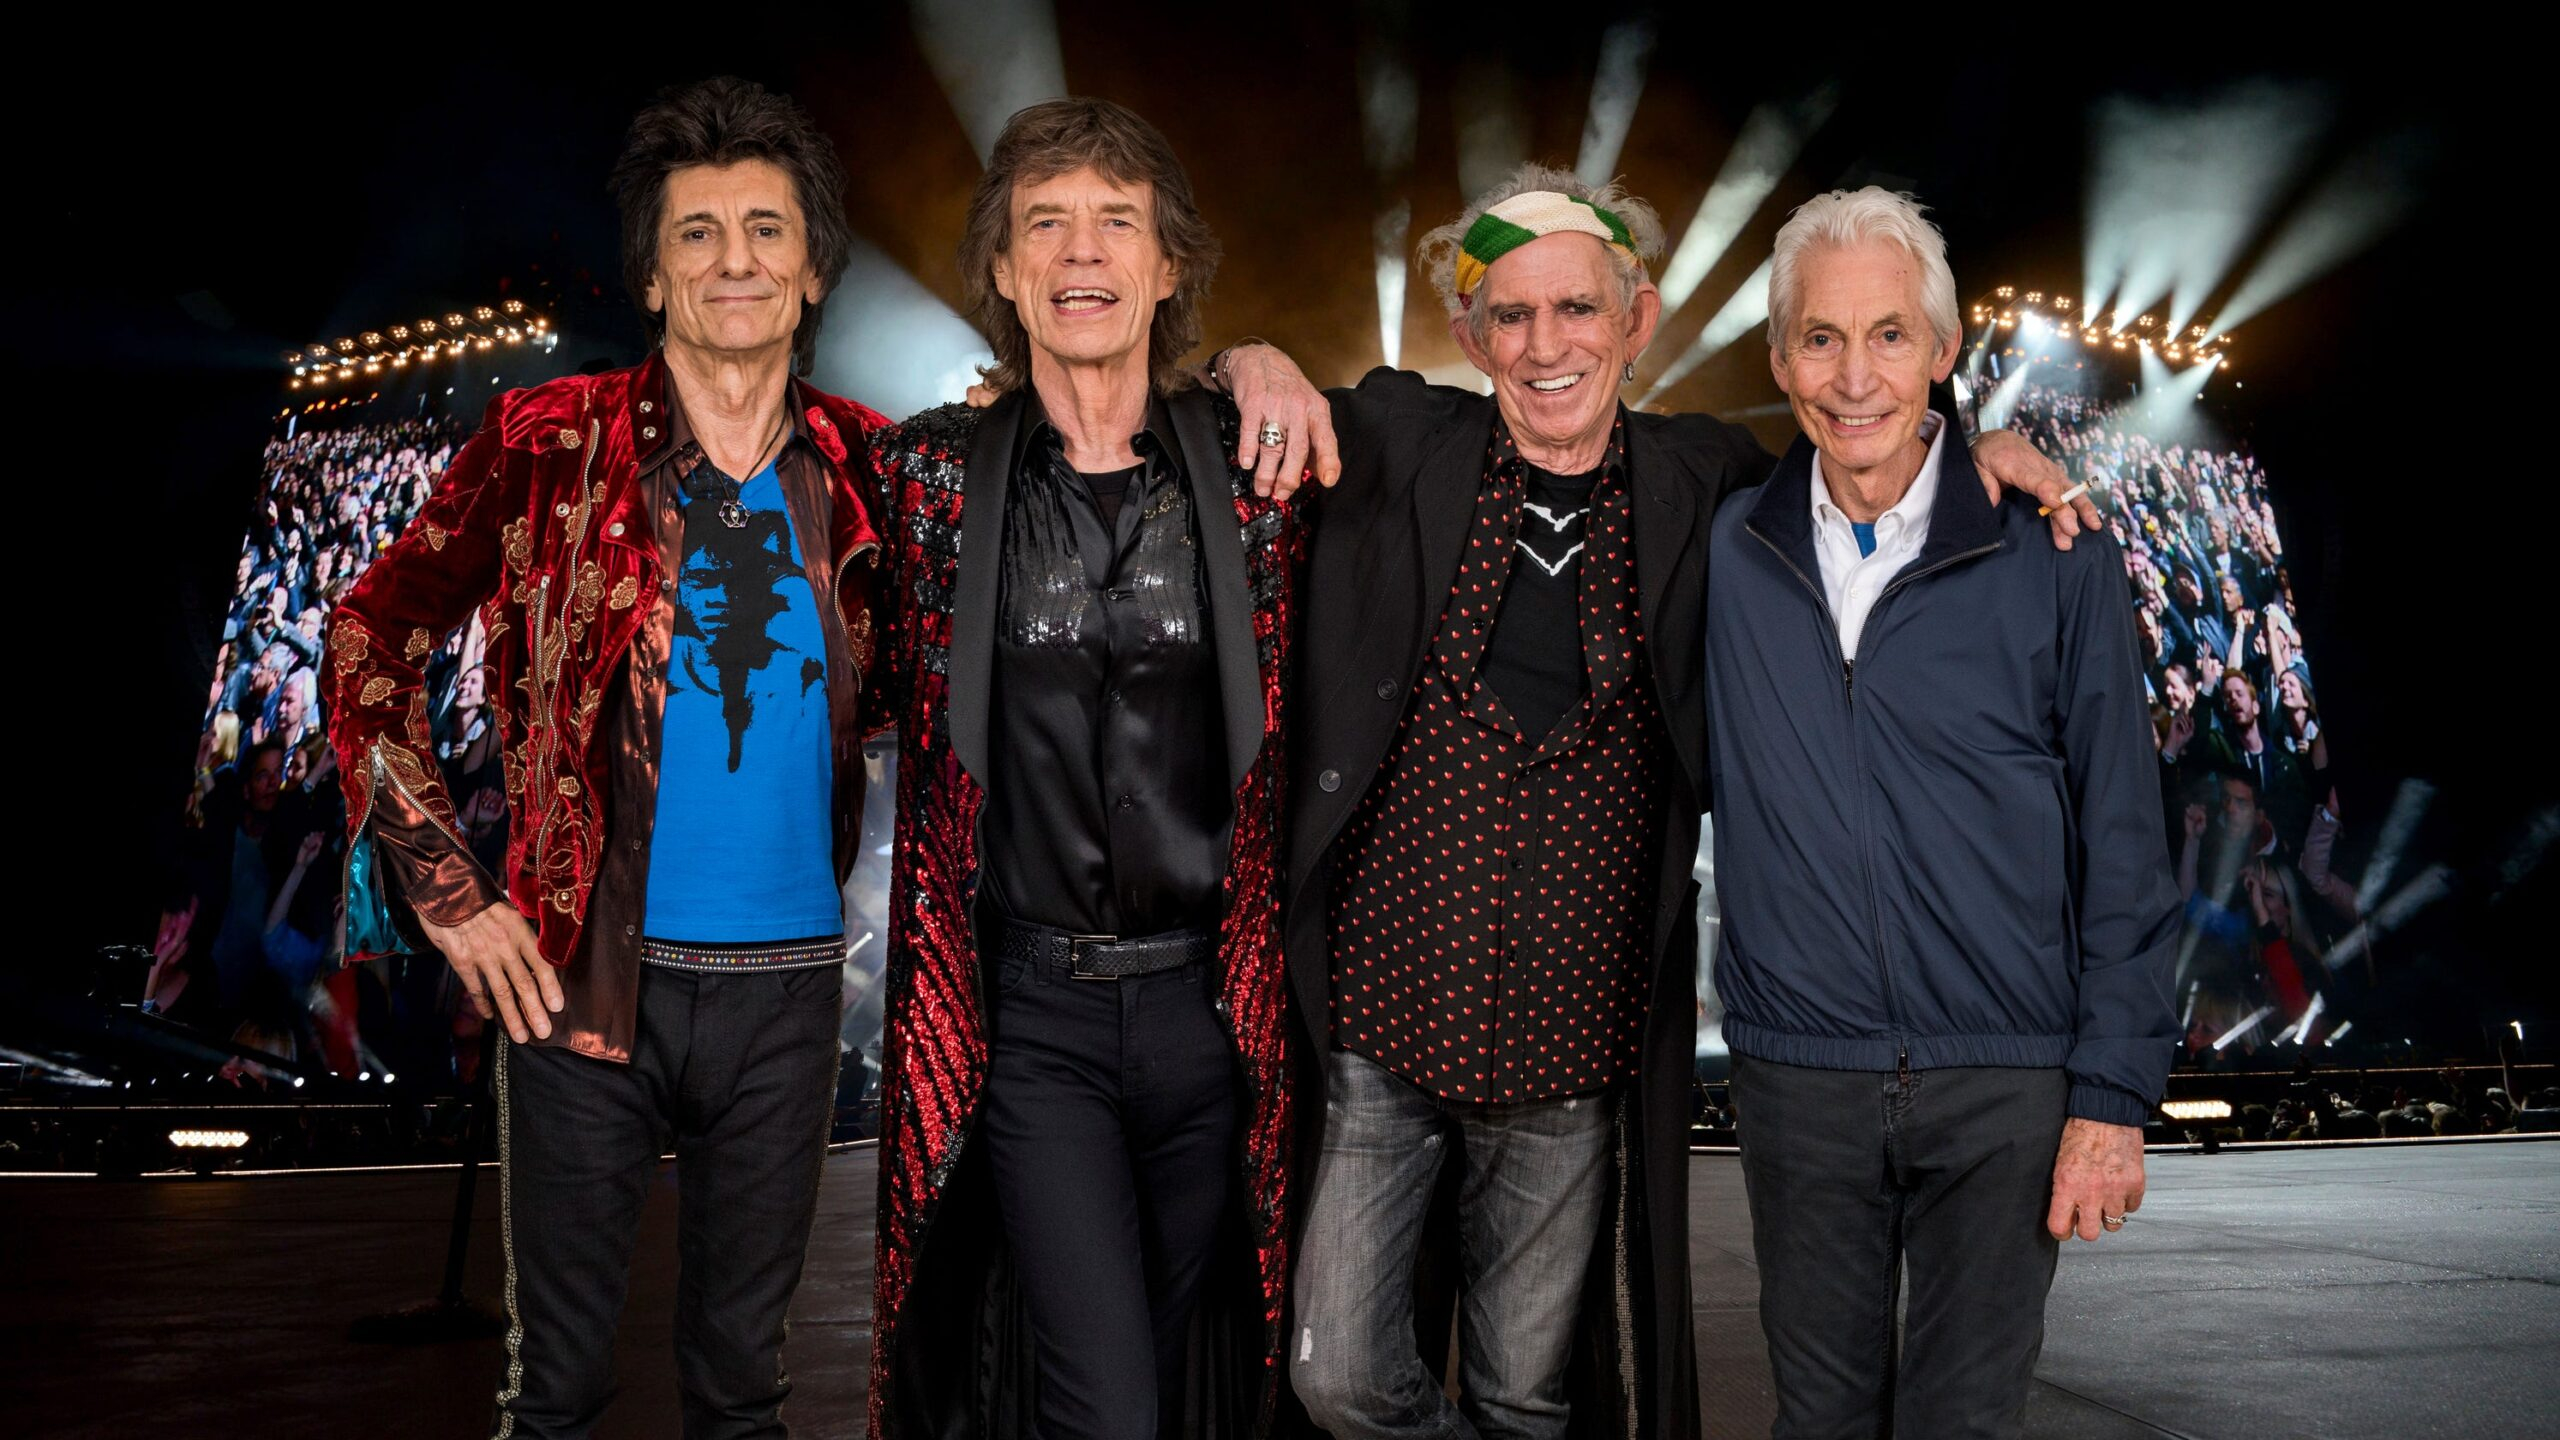 2560x1440 The rolling stones 2020 band scaled music wallpaper | | 1402658 |